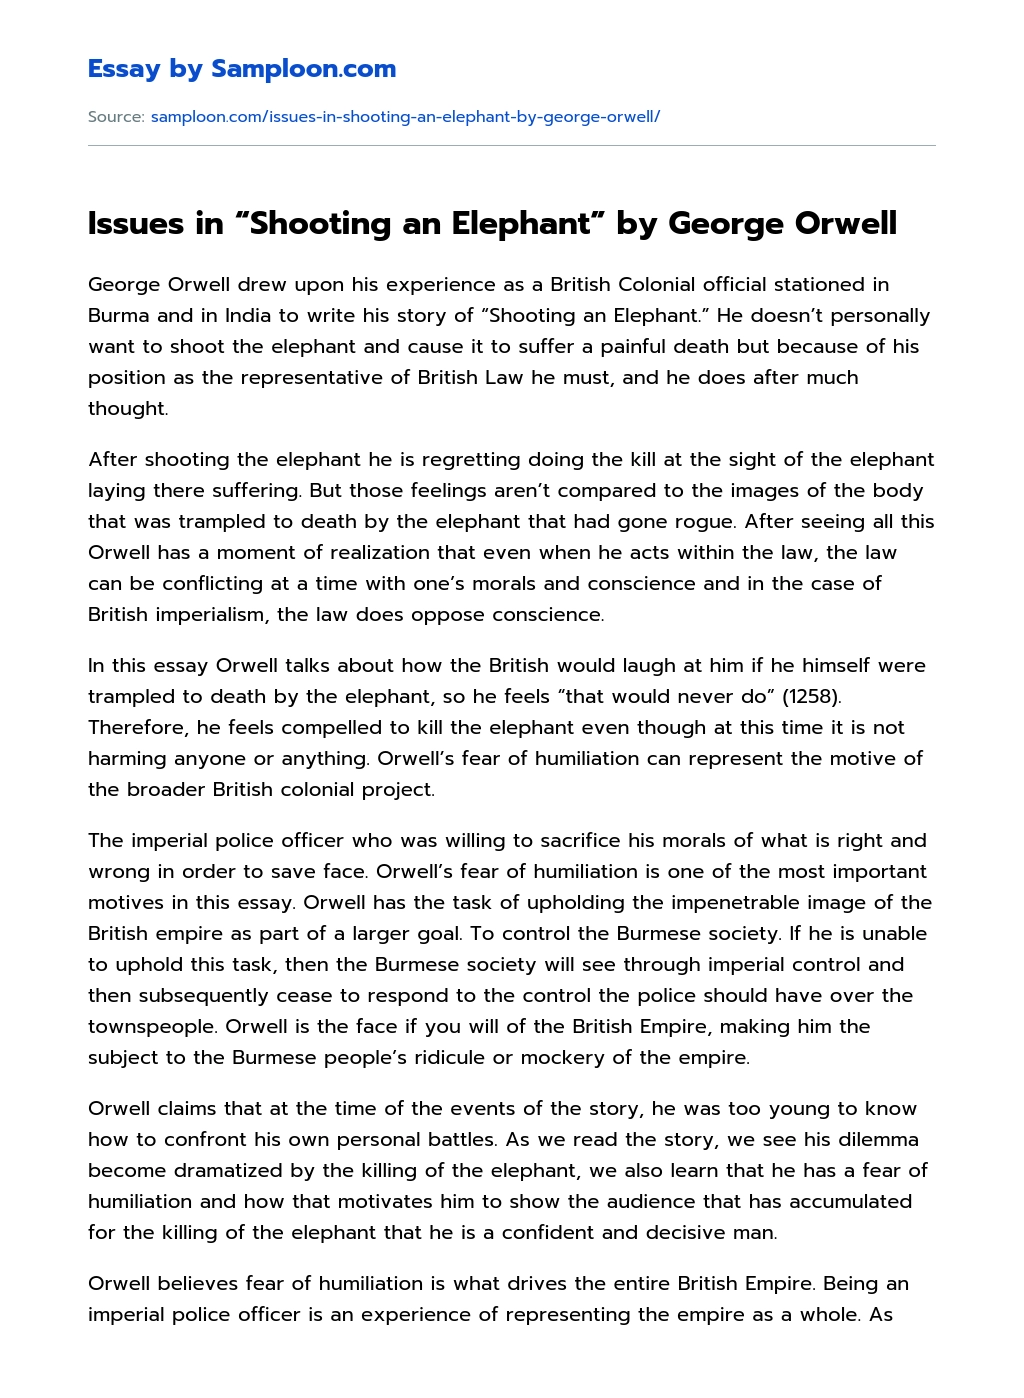 Issues in “Shooting an Elephant” by George Orwell Rhetorical Analysis essay